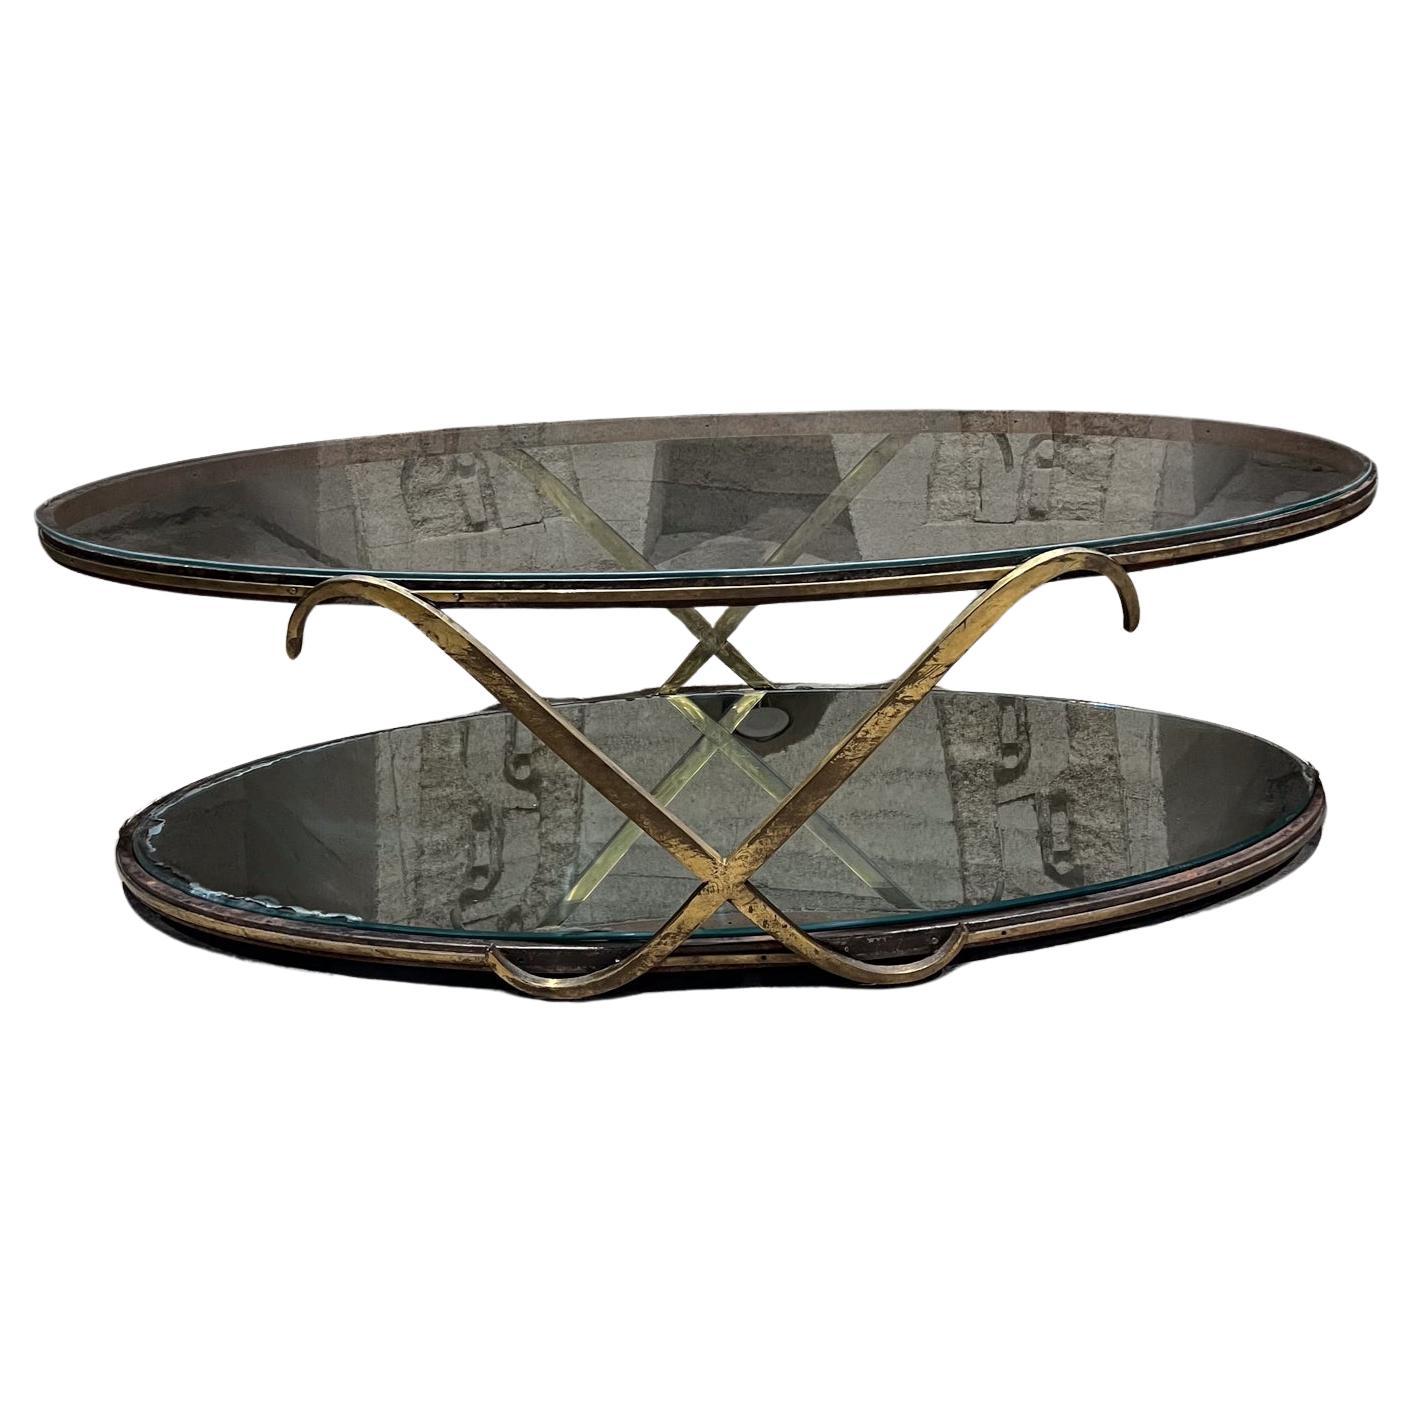 1950s Sculptural Tiered Coffee Table Arturo Pani Mexico City For Sale